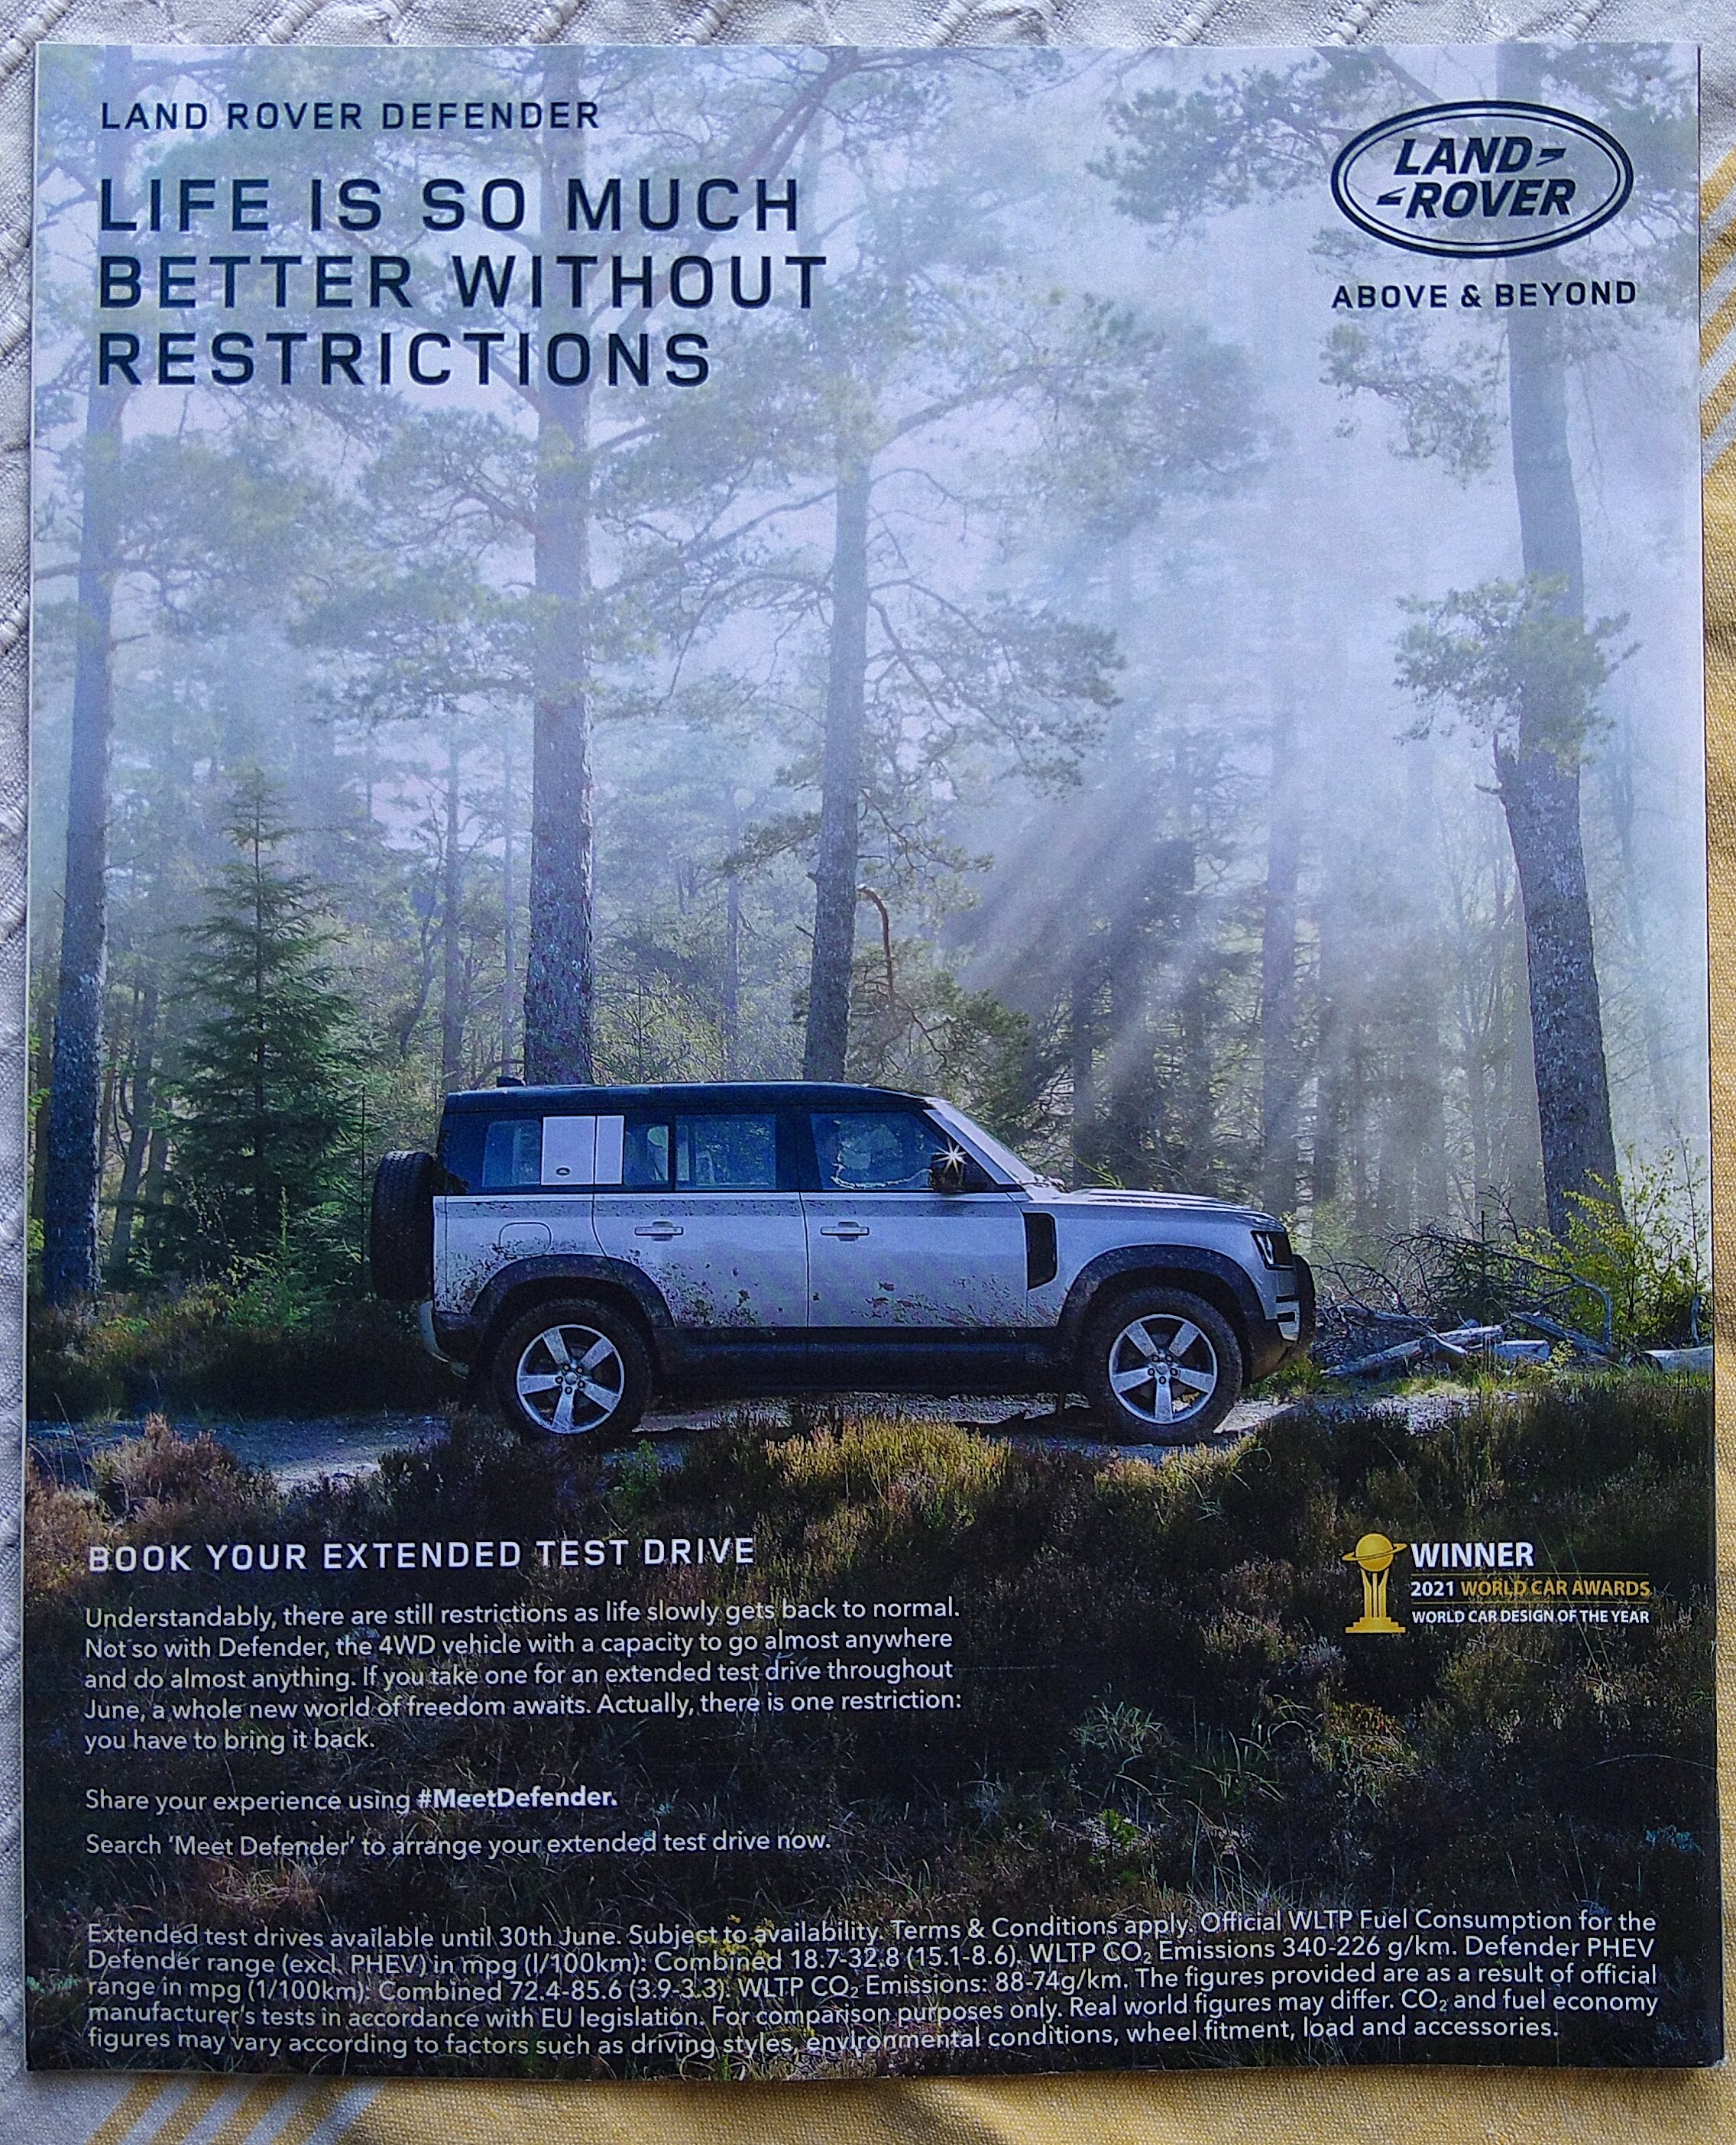 The Land-Rover The Go Anywhere Vehicle Promotion Poster